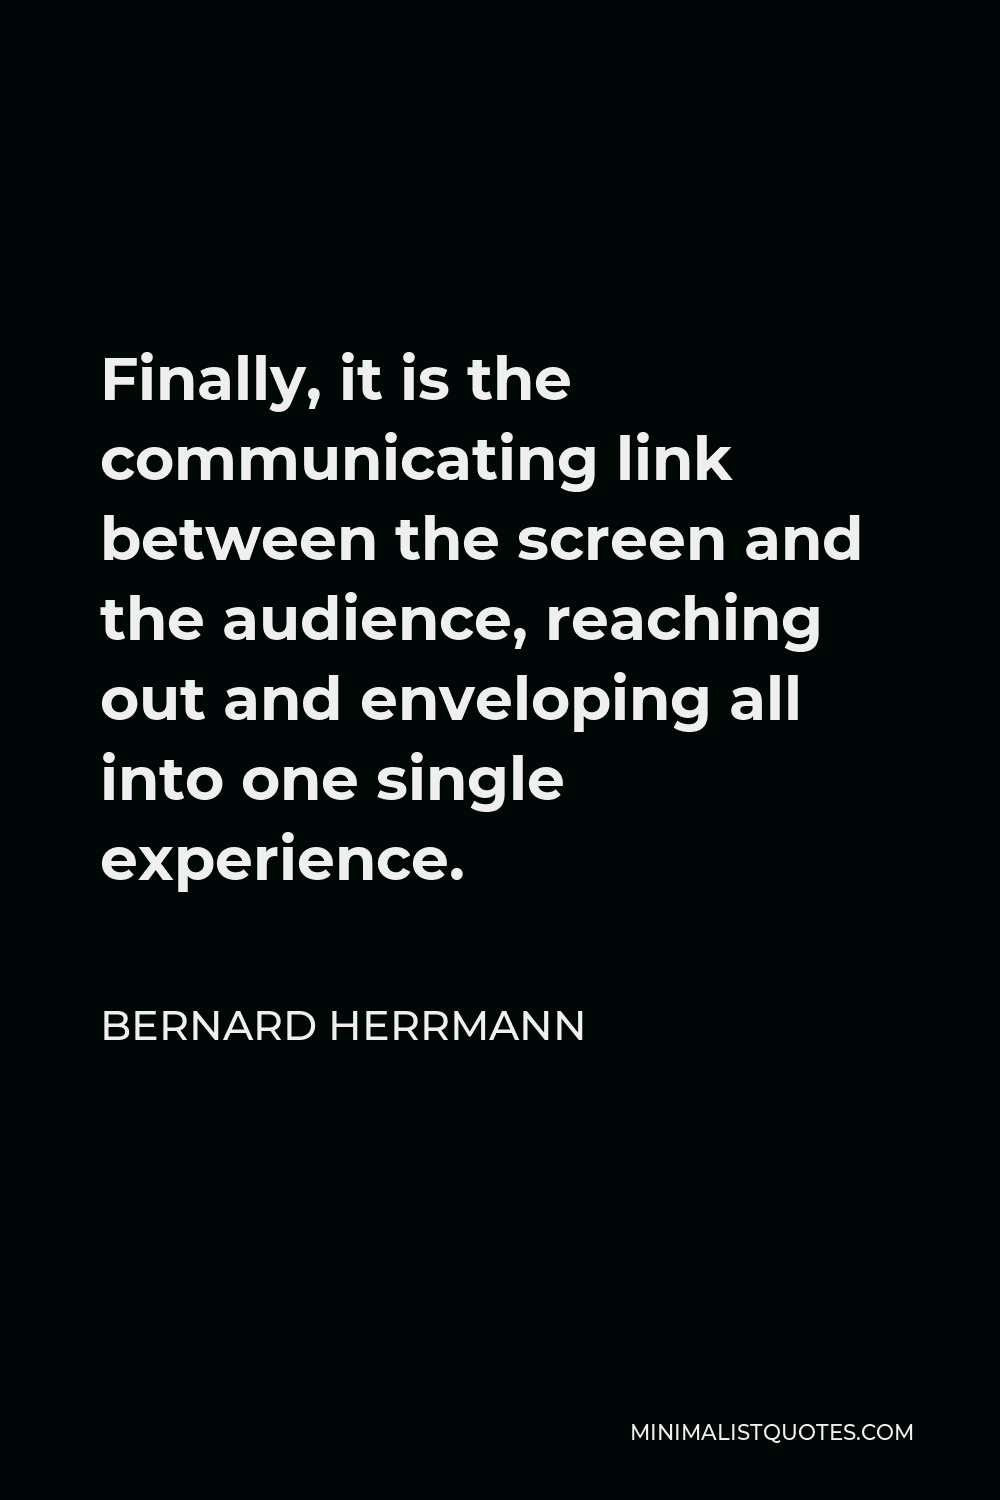 Bernard Herrmann Quote - Finally, it is the communicating link between the screen and the audience, reaching out and enveloping all into one single experience.